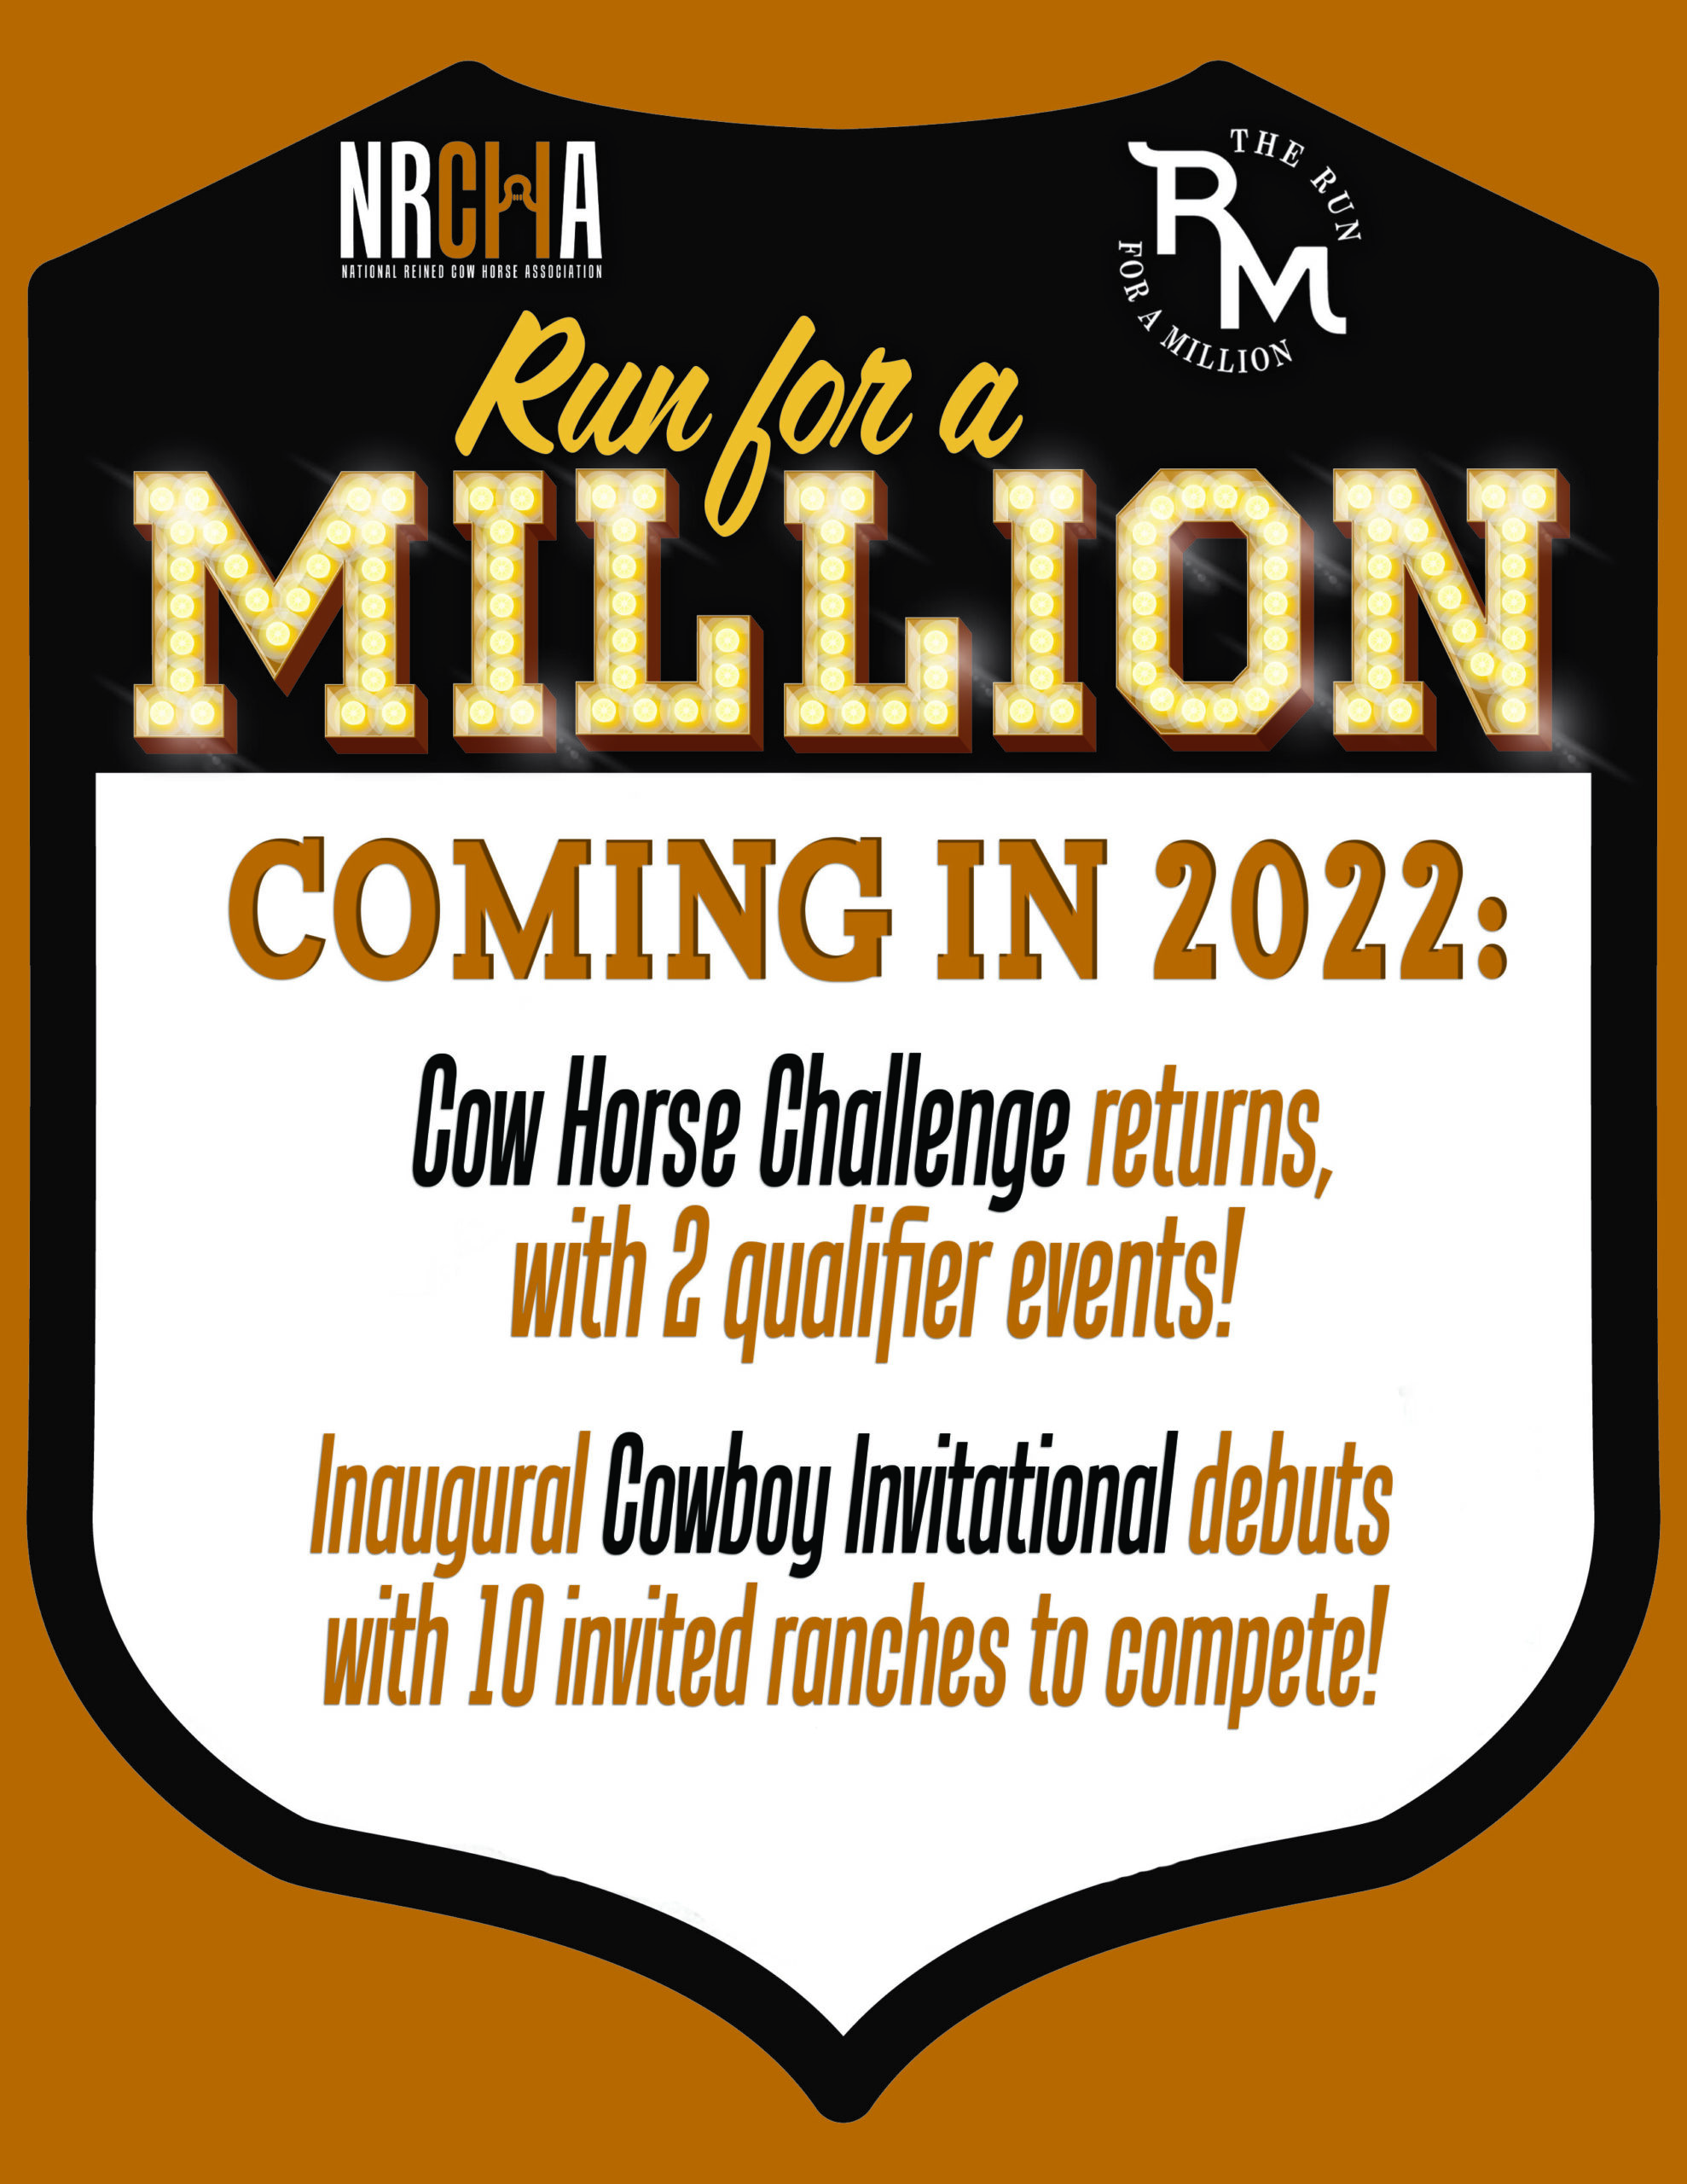 THE RUN FOR A MILLION PARTNERS WITH NRCHA TO ANNOUNCE THE COW HORSE